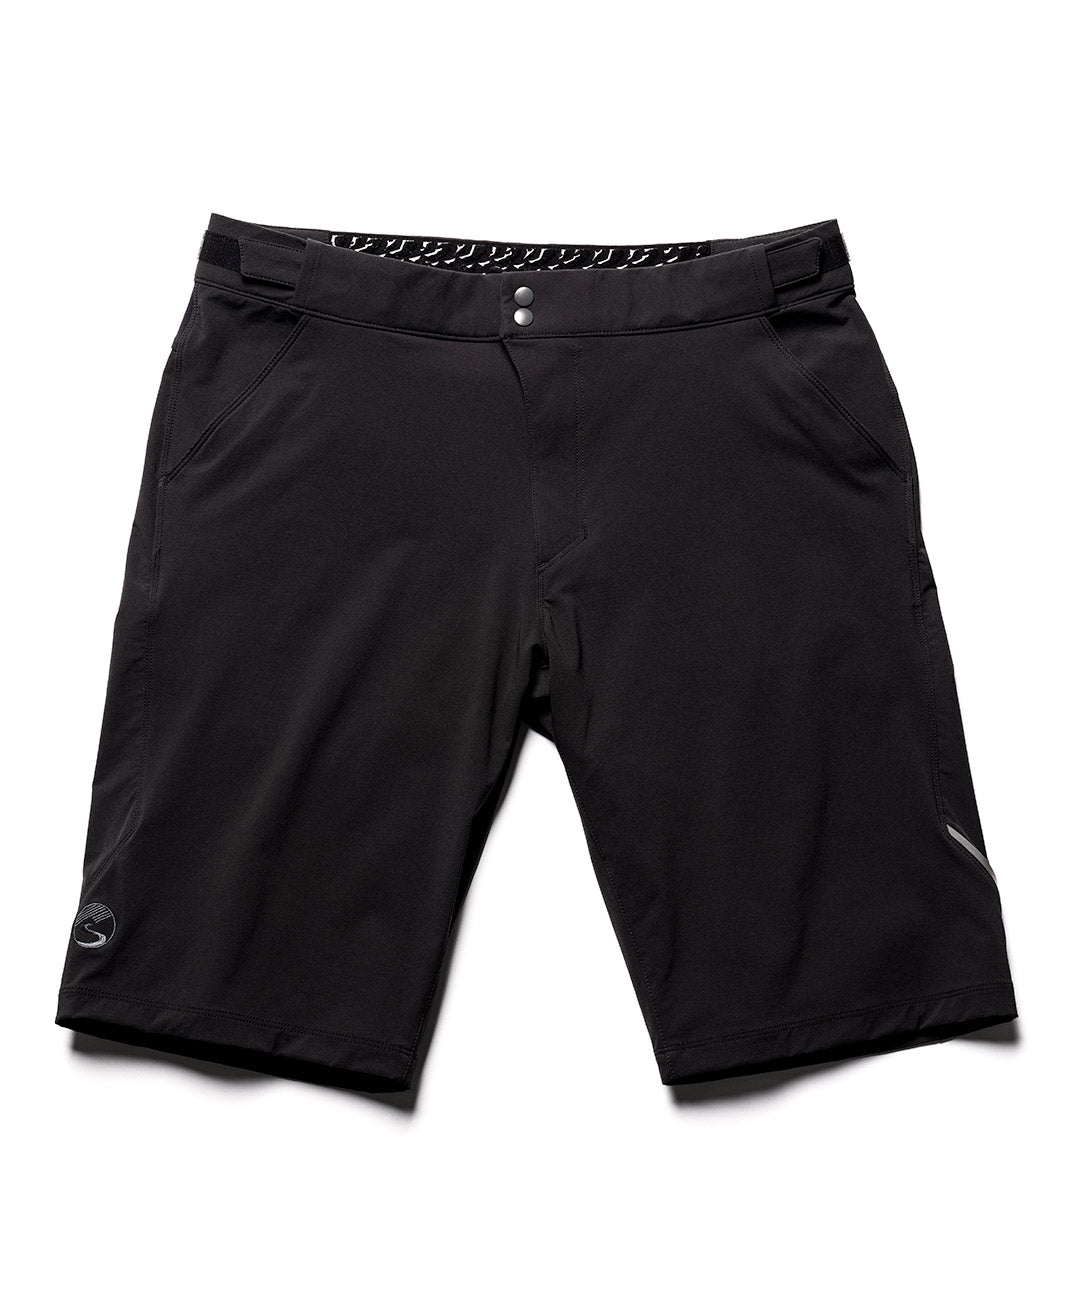 Men's Cross Country DWR 11.5” Shorts